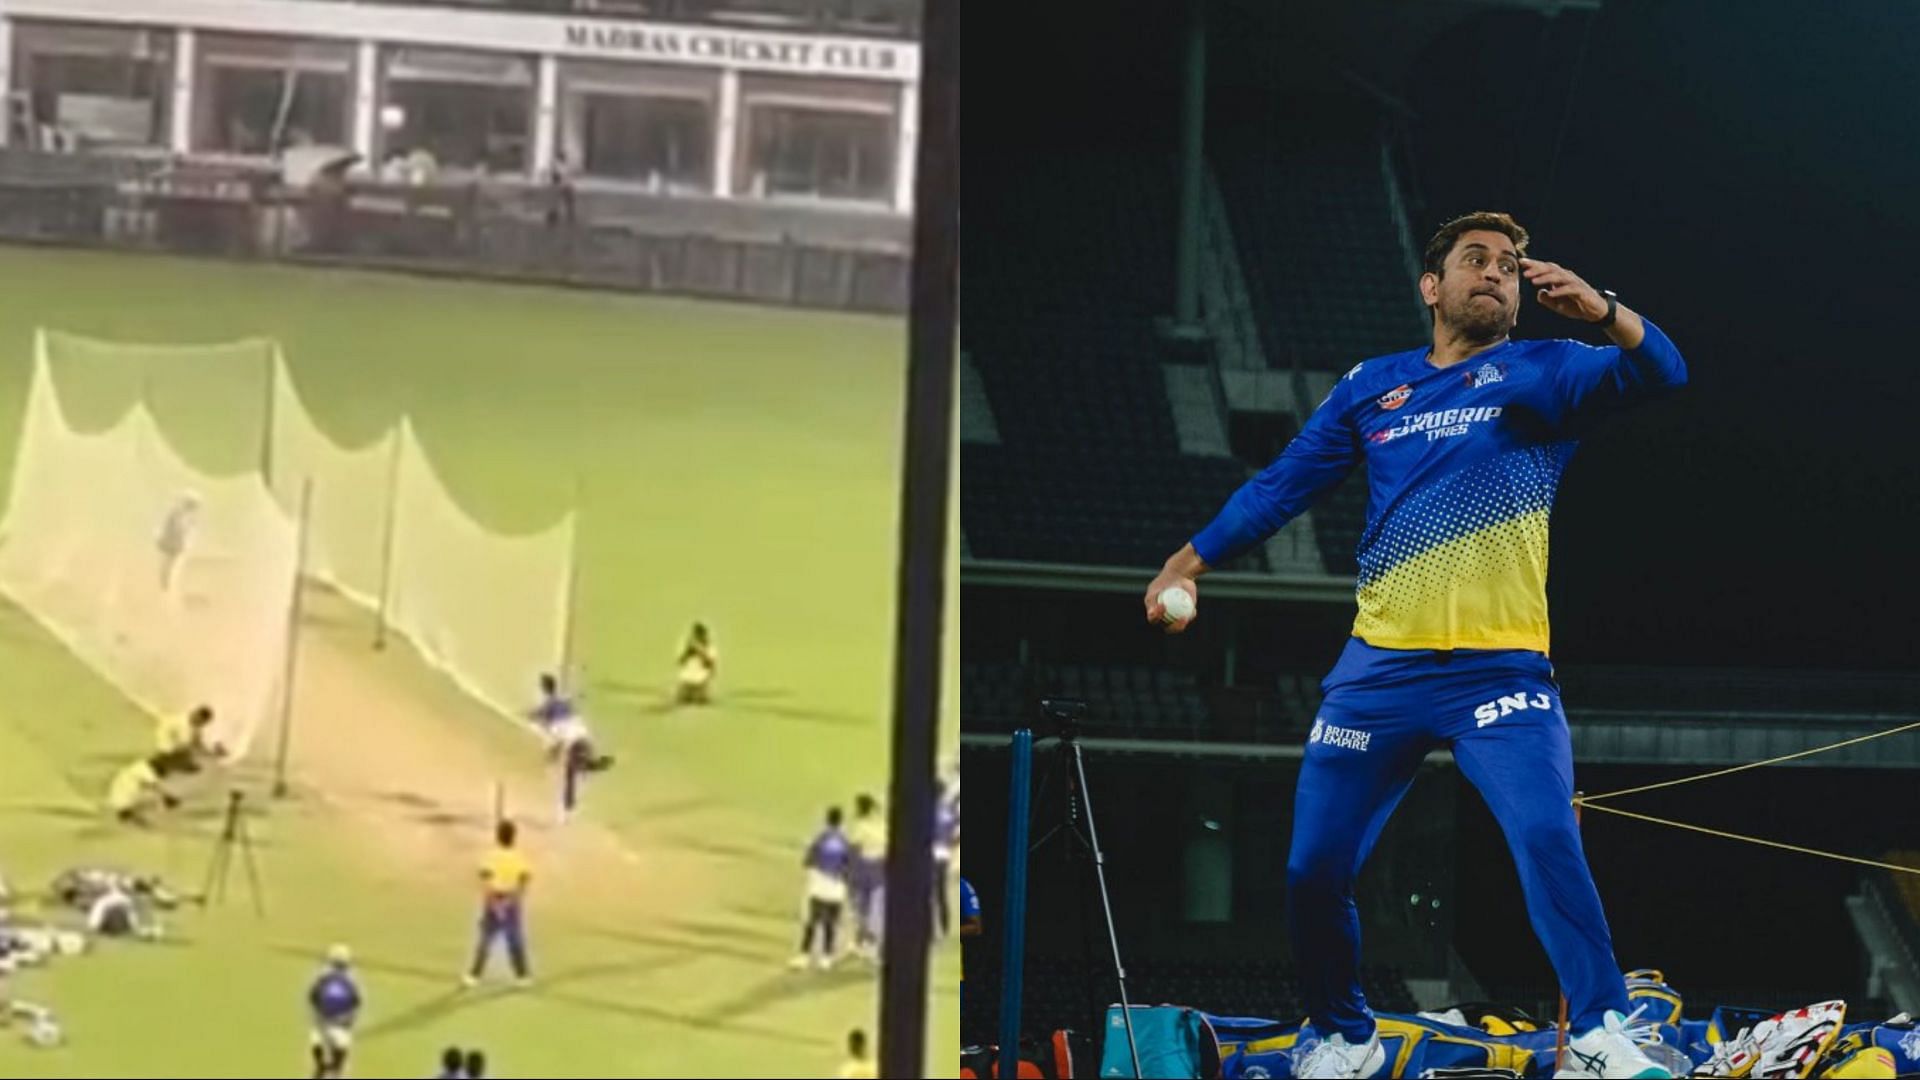 MS Dhoni was spotted bowling in the CSK camp (Image: Twitter)